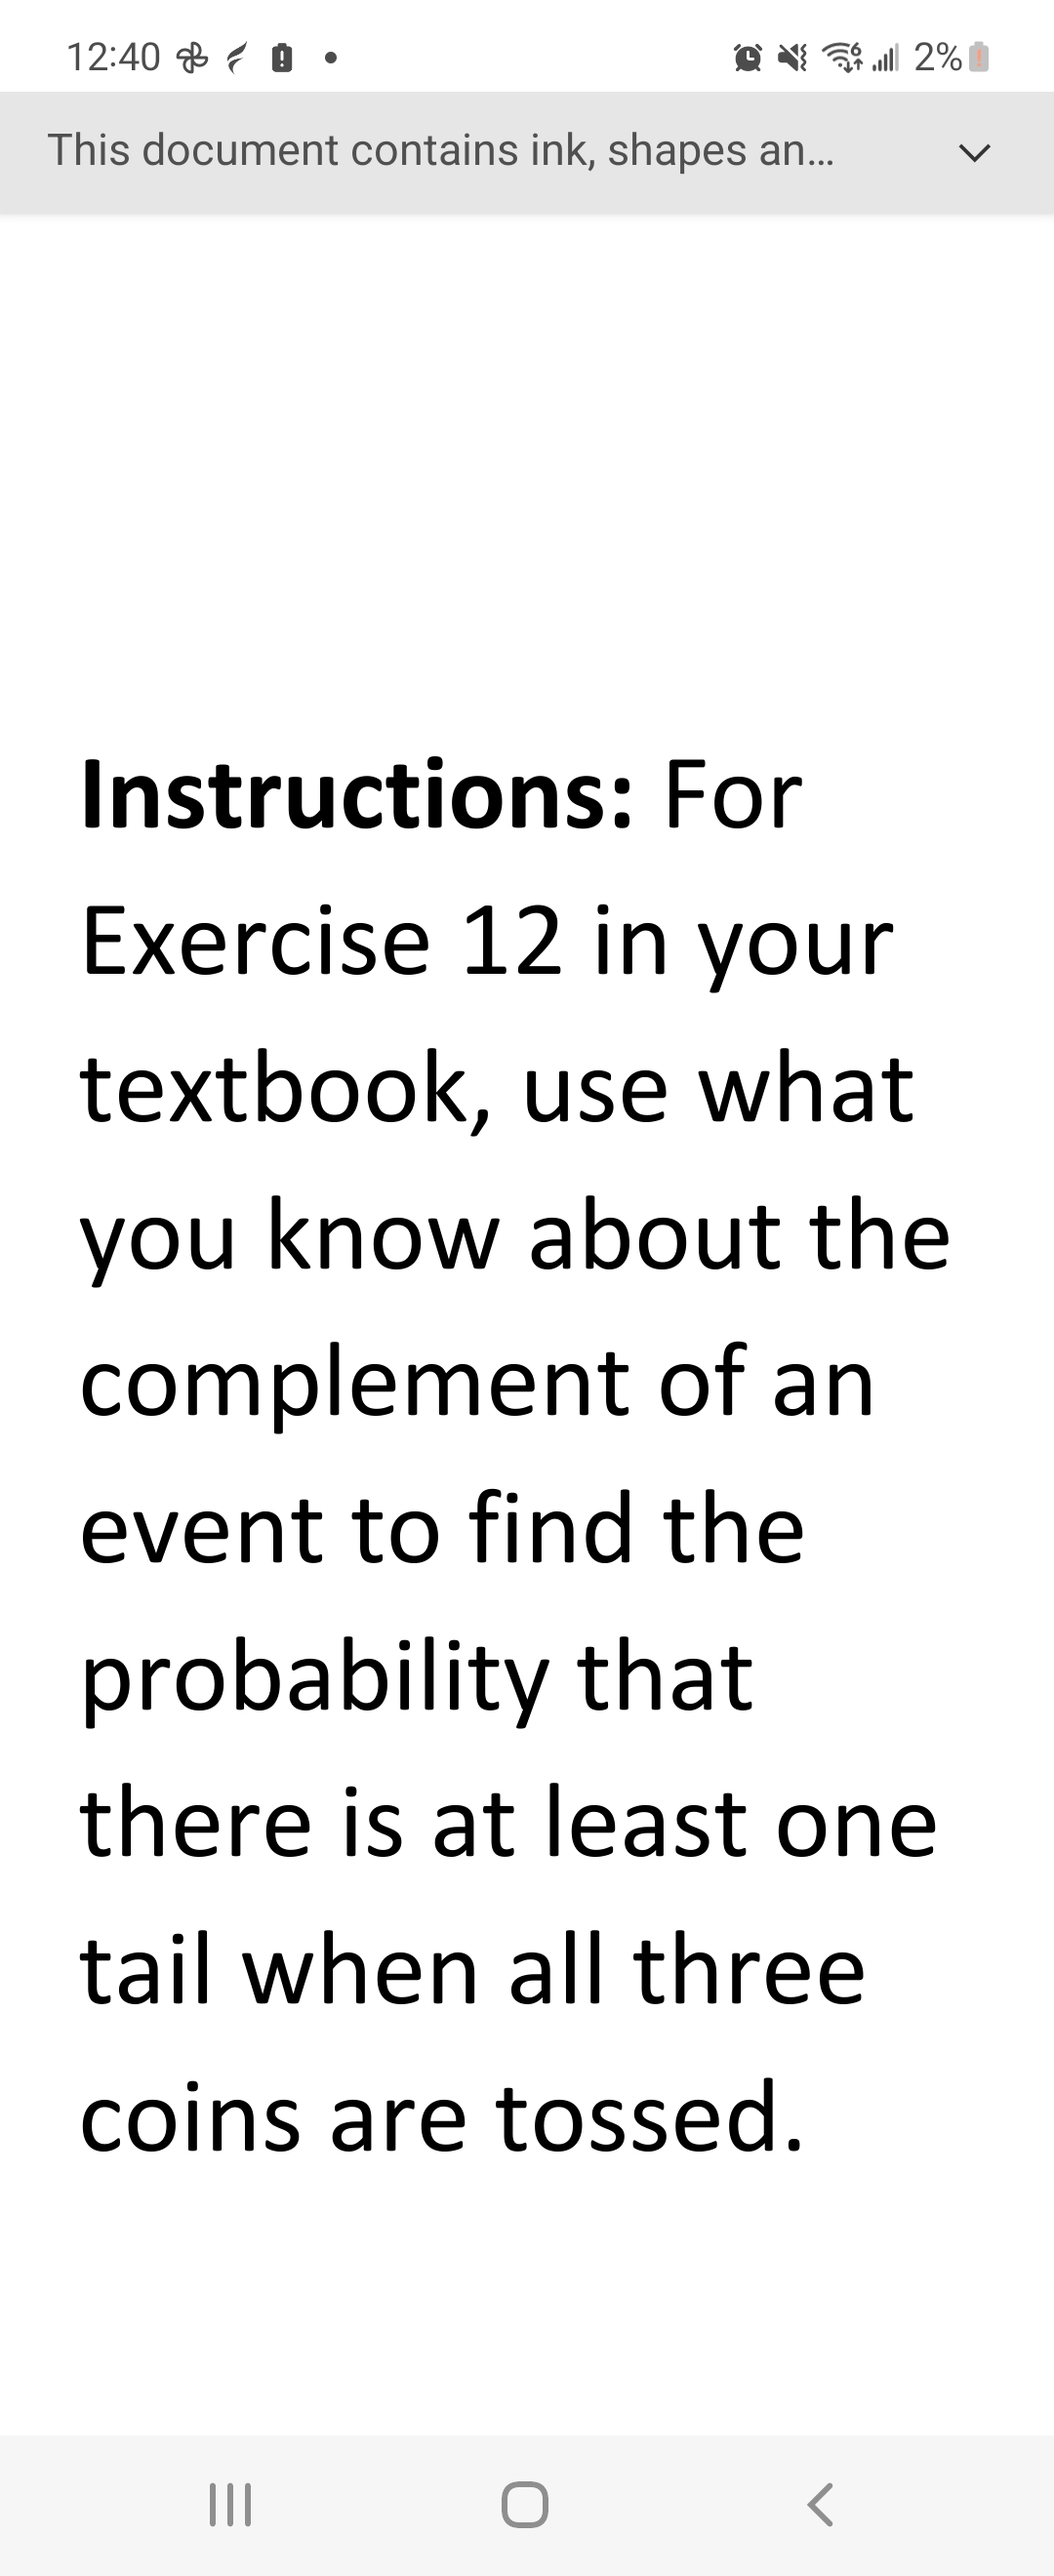 12:40
This document contains ink, shapes an...
Instructions: For
Exercise 12 in your
textbook, use what
you know about the
complement of an
event to find the
... 2% |
probability that
there is at least one
tail when all three
coins are tossed.
|||
<